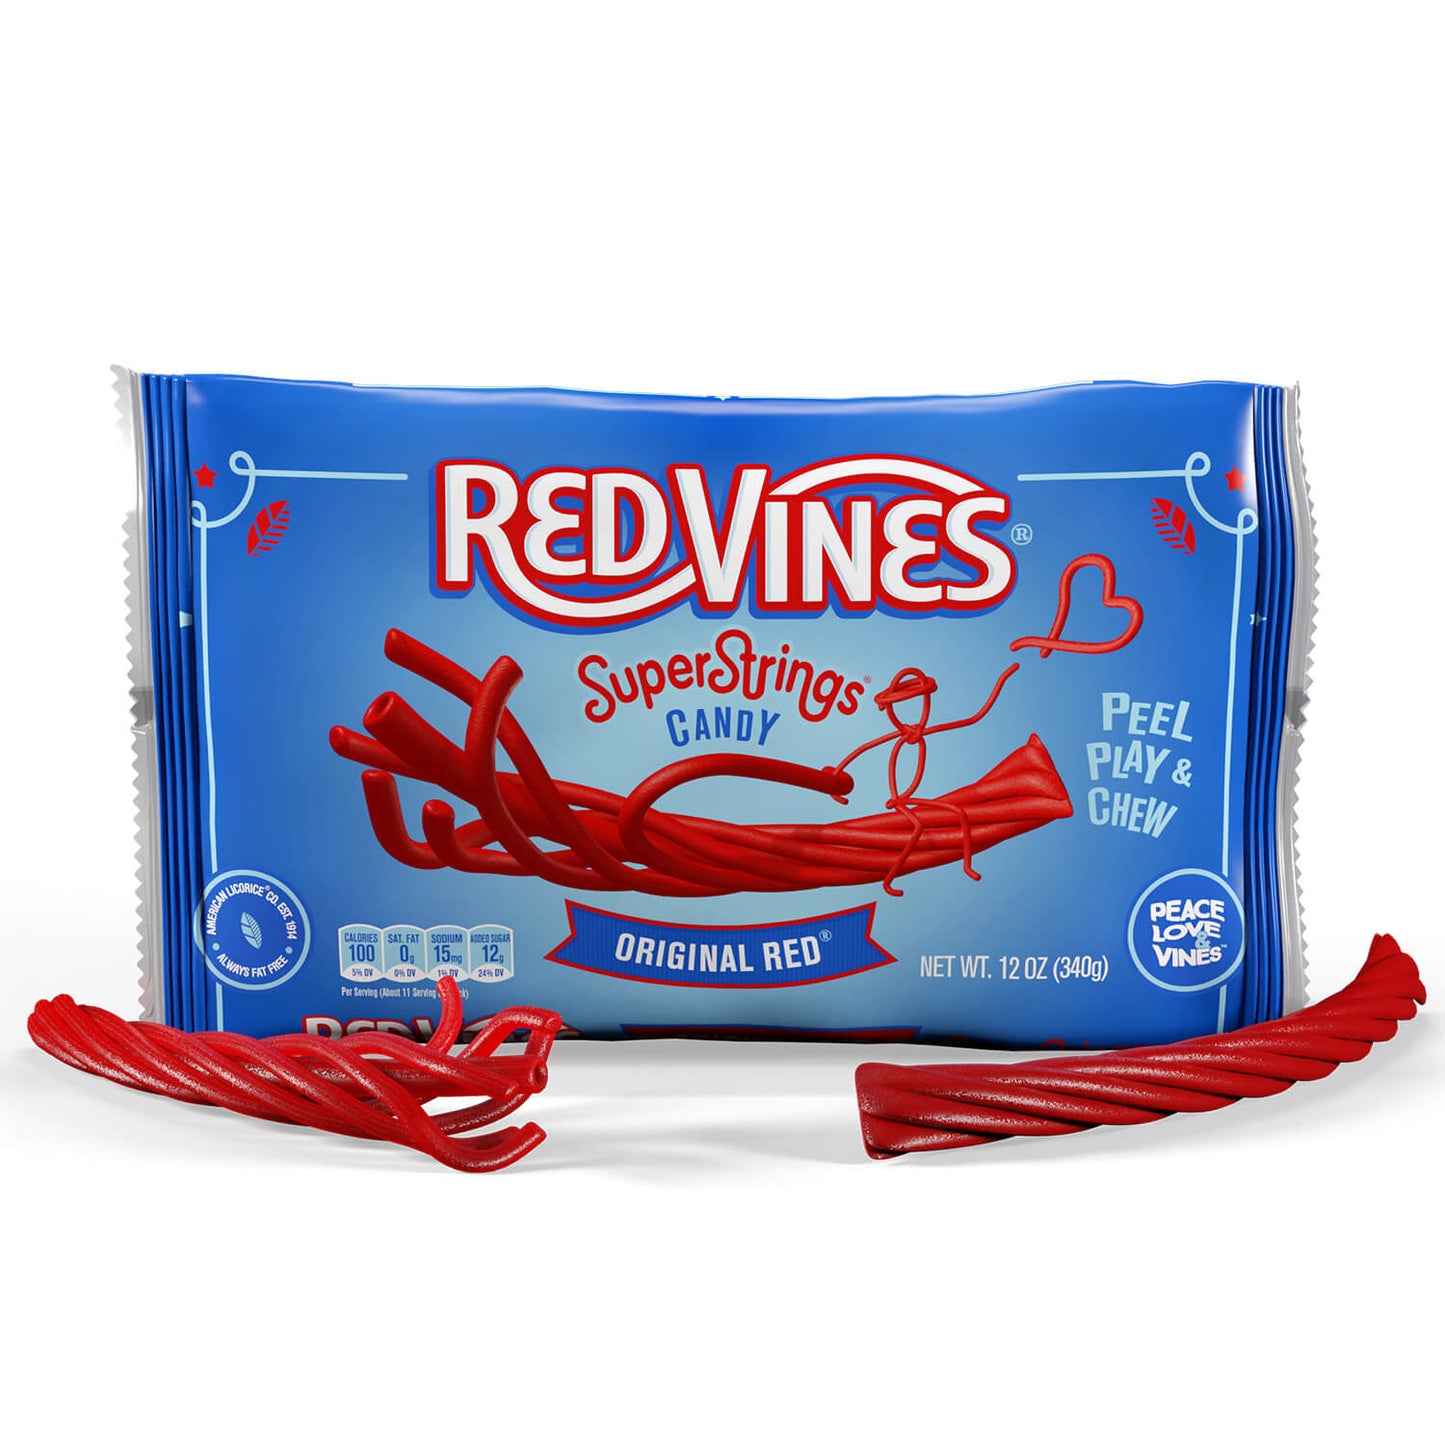 Red Vines SuperStrings Original Red Pull Apart Licorice Candy, 12oz bag with licorice in front